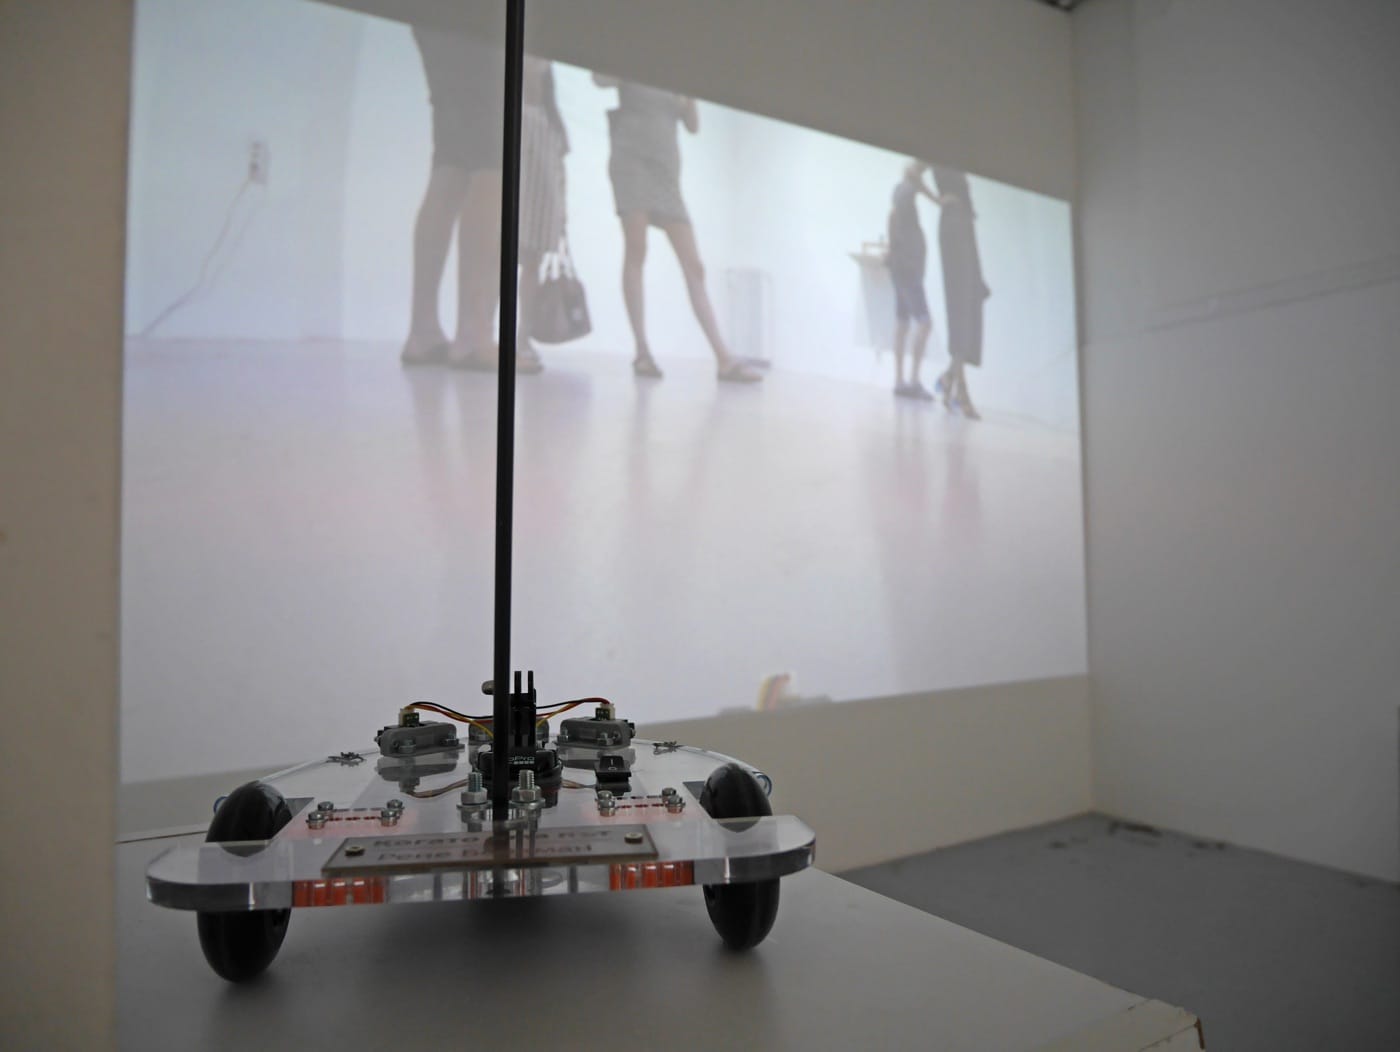 Whenever there is a way, an autonomous car by Rene Beekman, at Малки забавни създания, installation view close-up at U10 gallery, Belgrade in June 2017